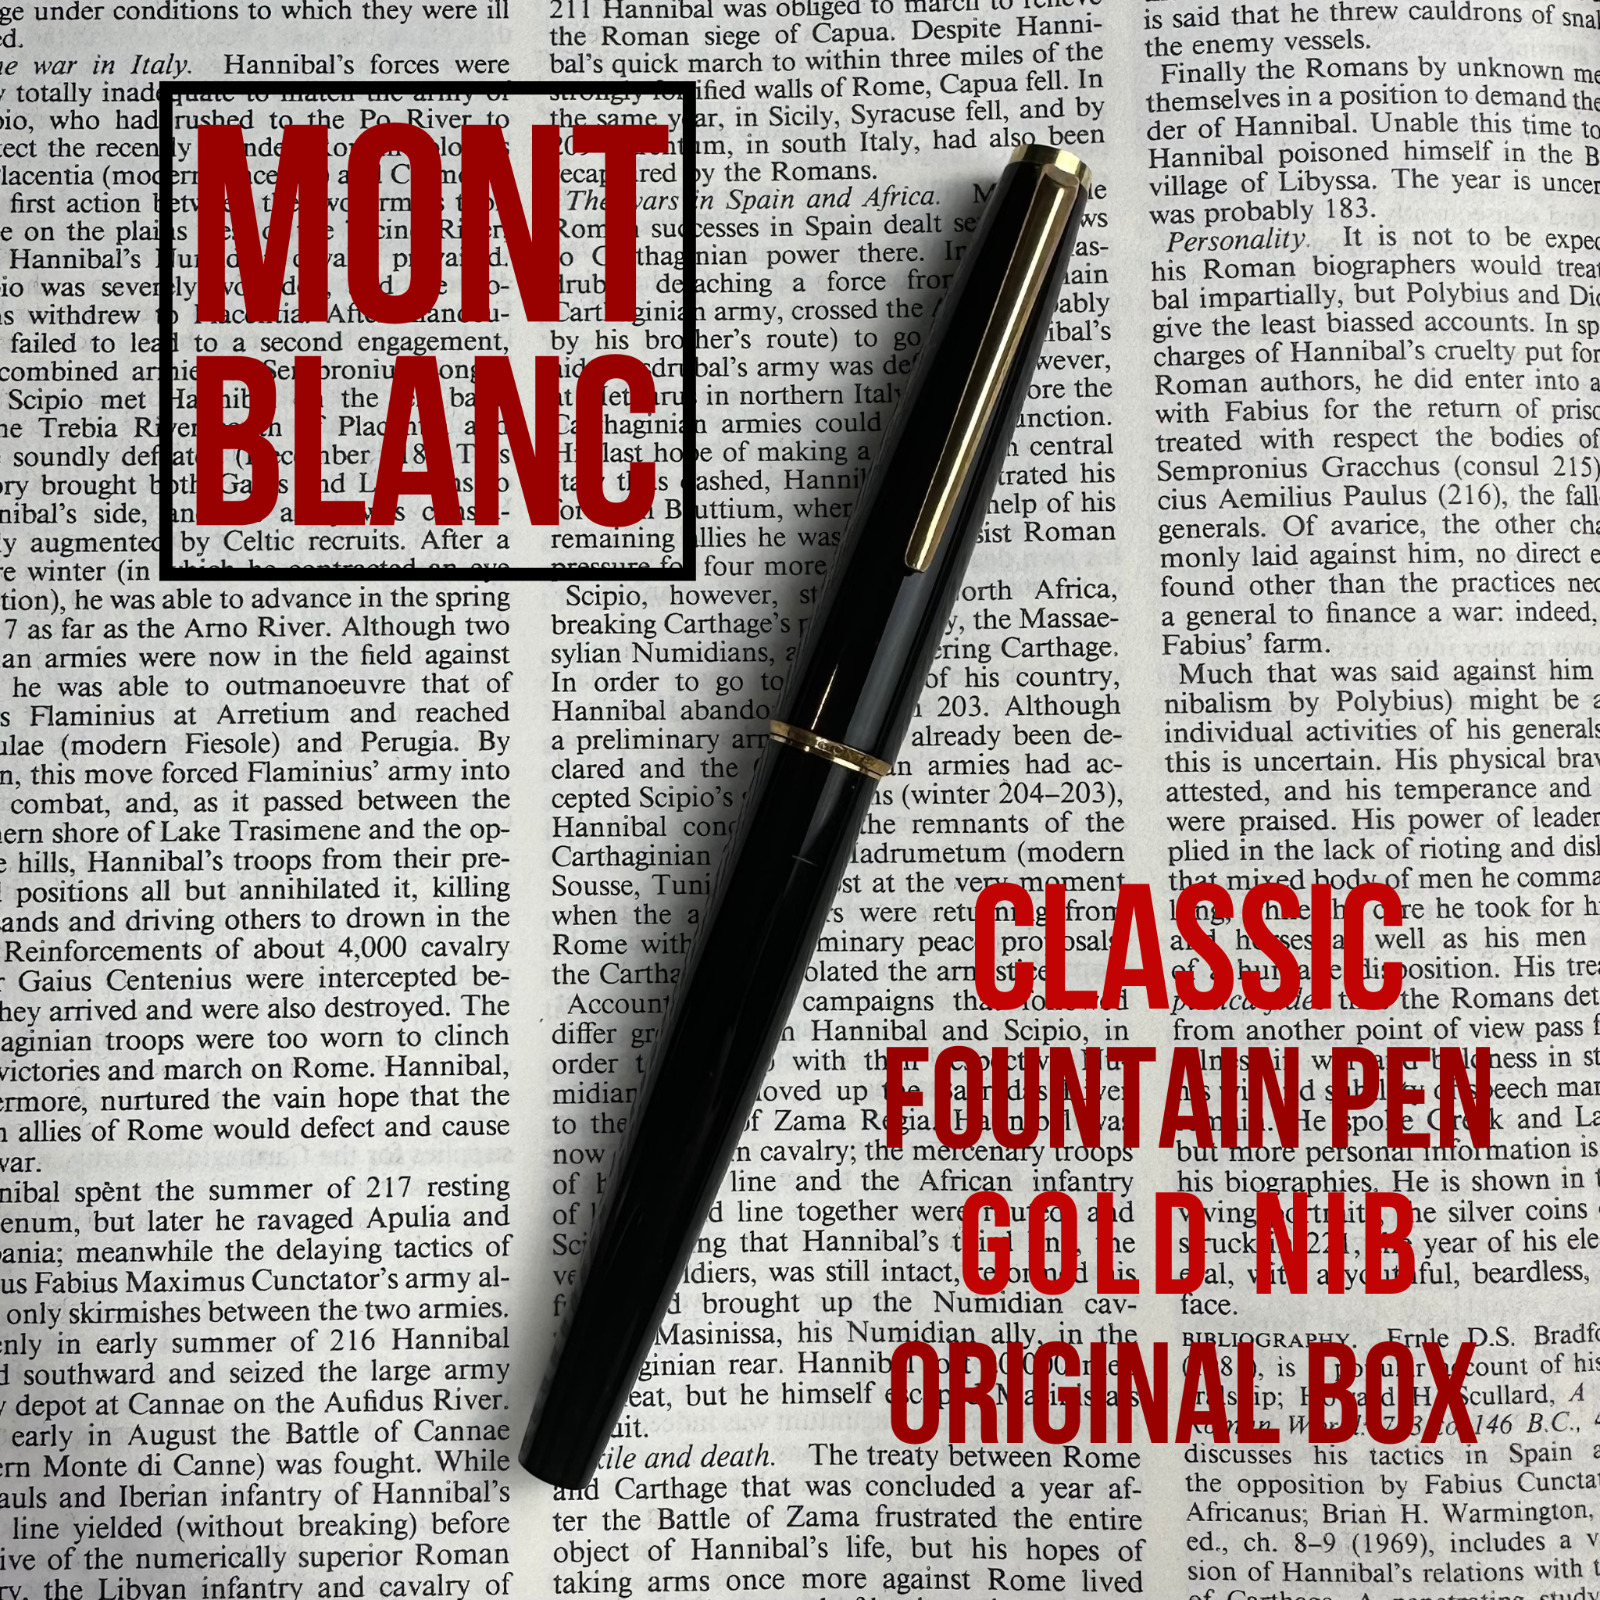 Montblanc Classic Fountain Pen With BOX - Excellent - Almost NOS